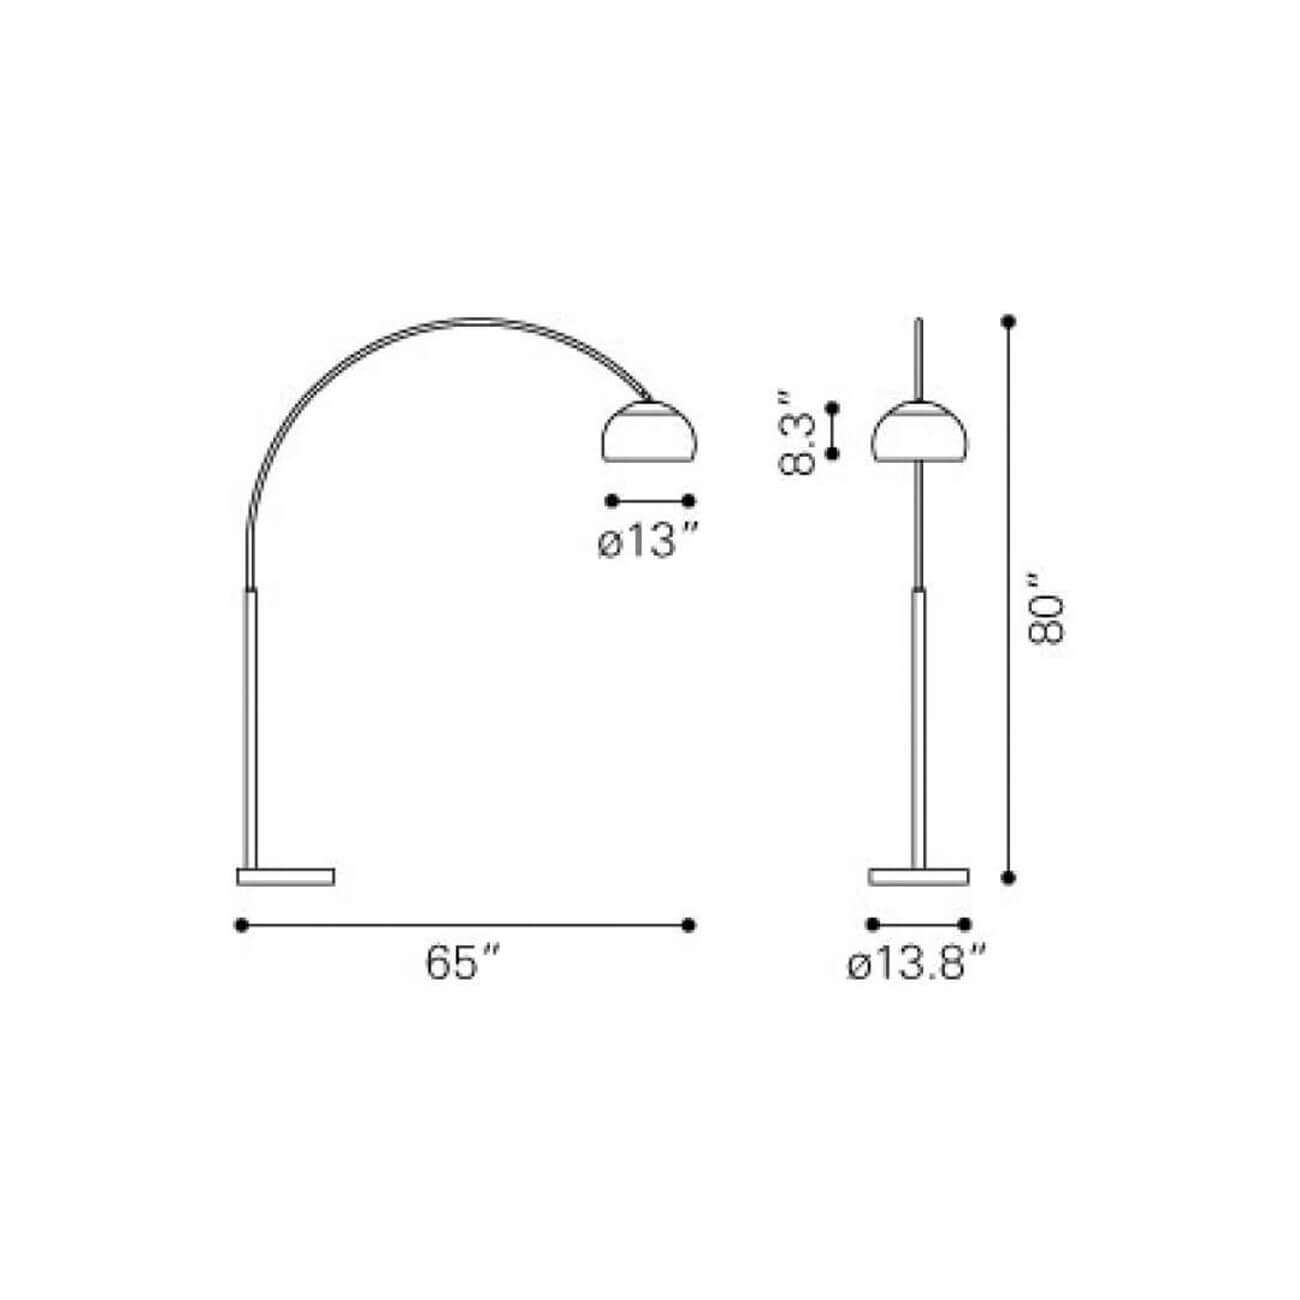 Arch floor lamp dimensions view